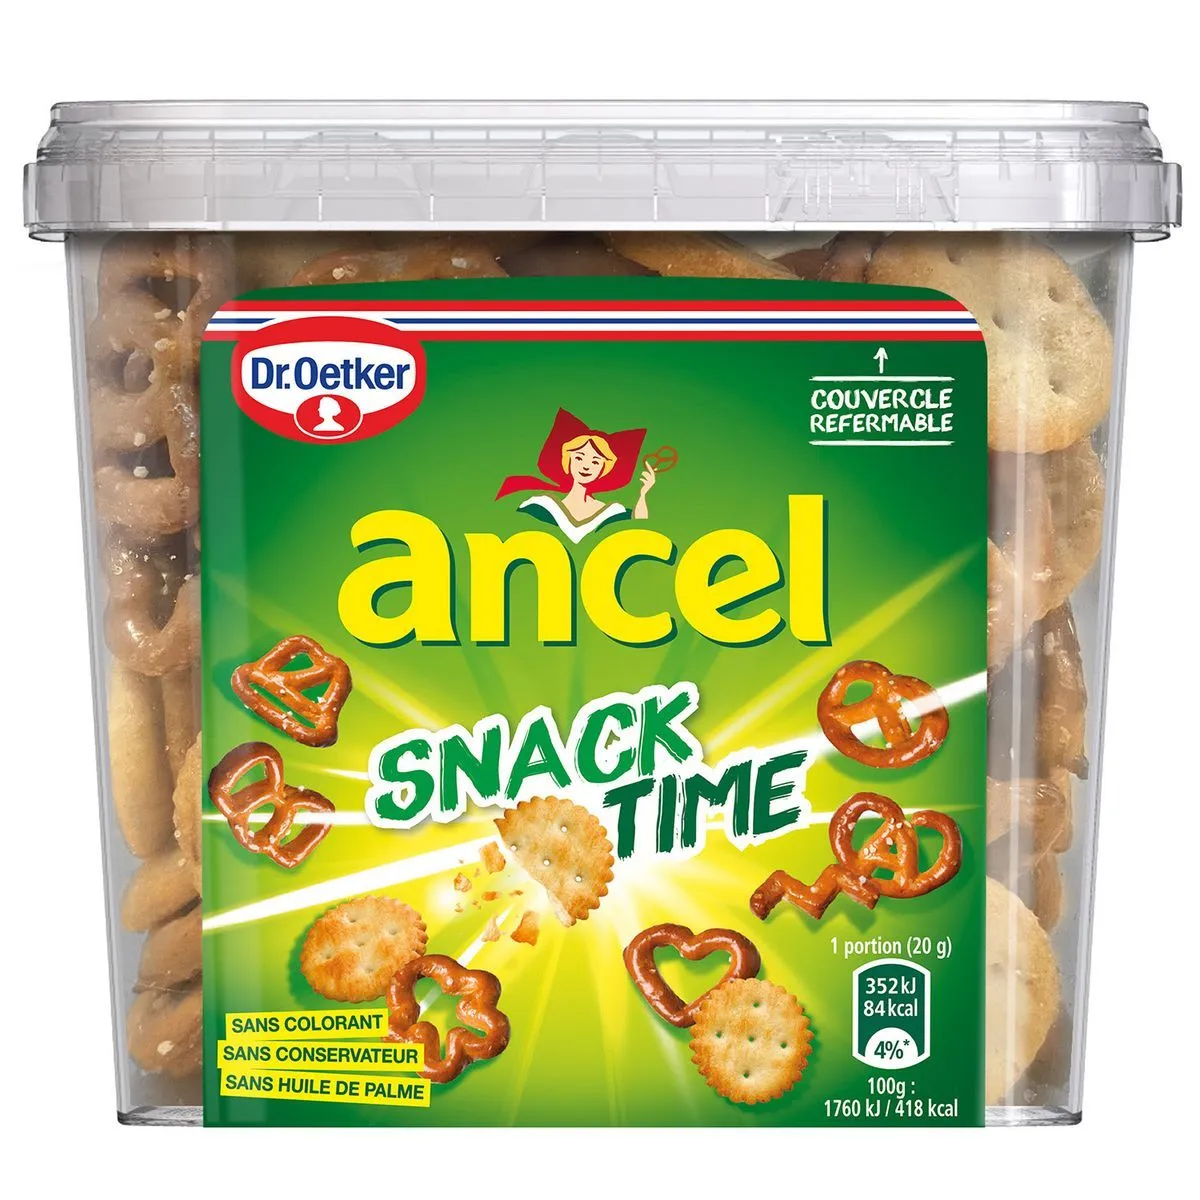 biscuits salés assortiment snack time ancel